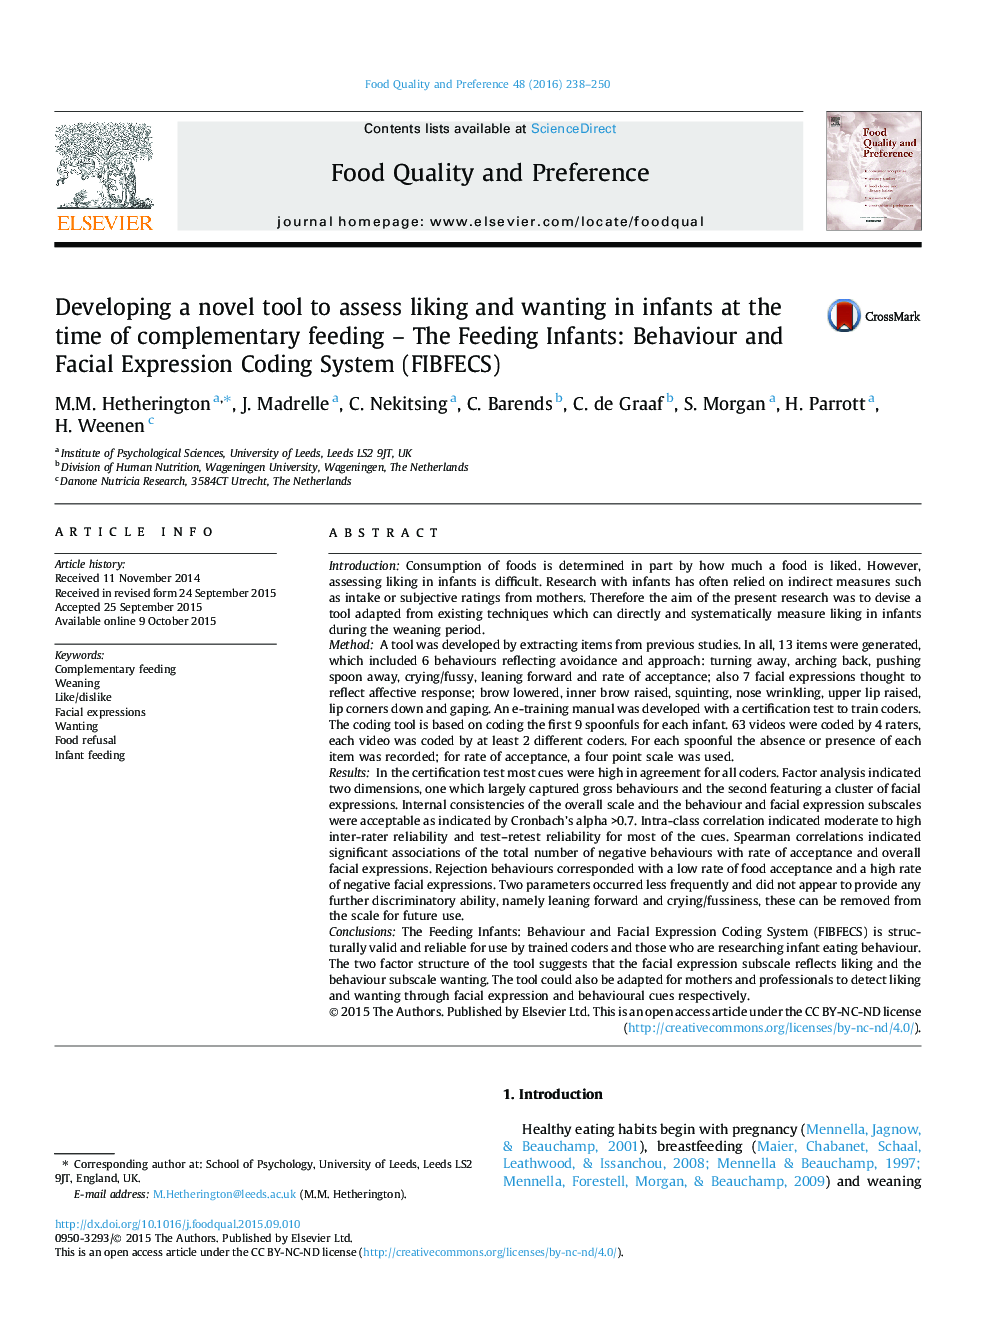 Developing a novel tool to assess liking and wanting in infants at the time of complementary feeding - The Feeding Infants: Behaviour and Facial Expression Coding System (FIBFECS)